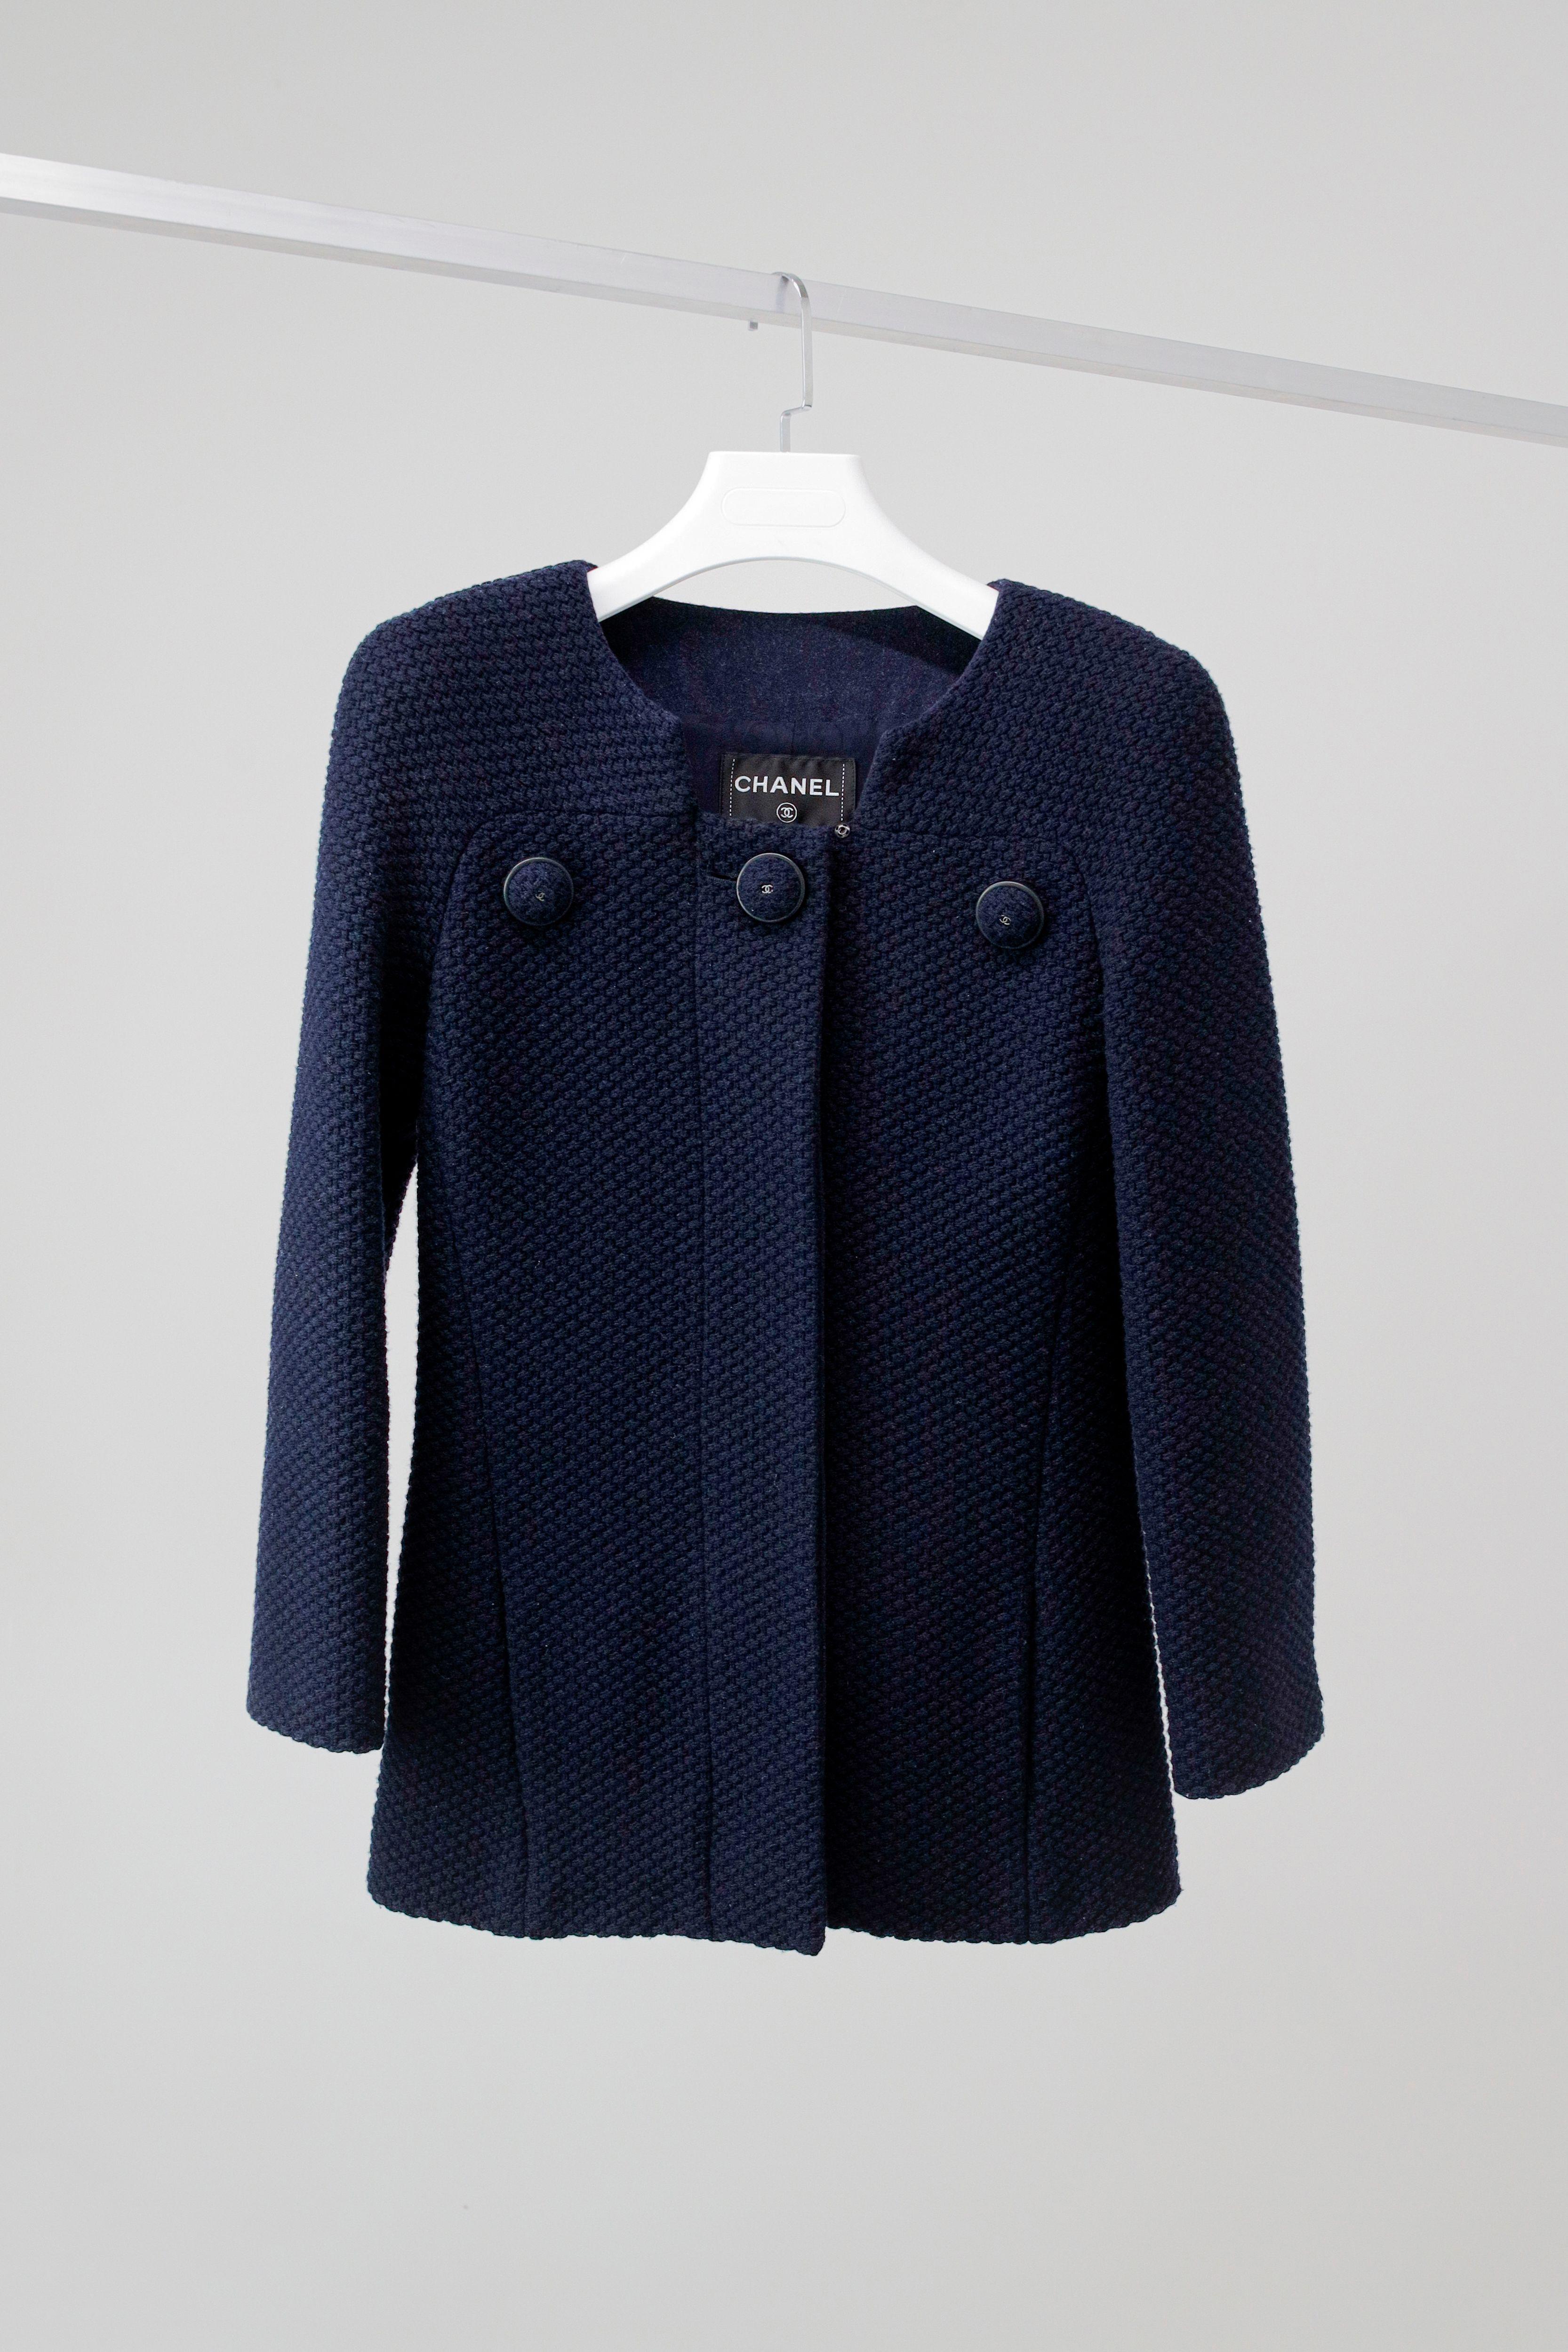 Gorgeous Chanel navy tweed jacket with massive CC logo tweed buttons.
- tonal silk lining with camellias
Size mark 42 FR. Condition is pristine.